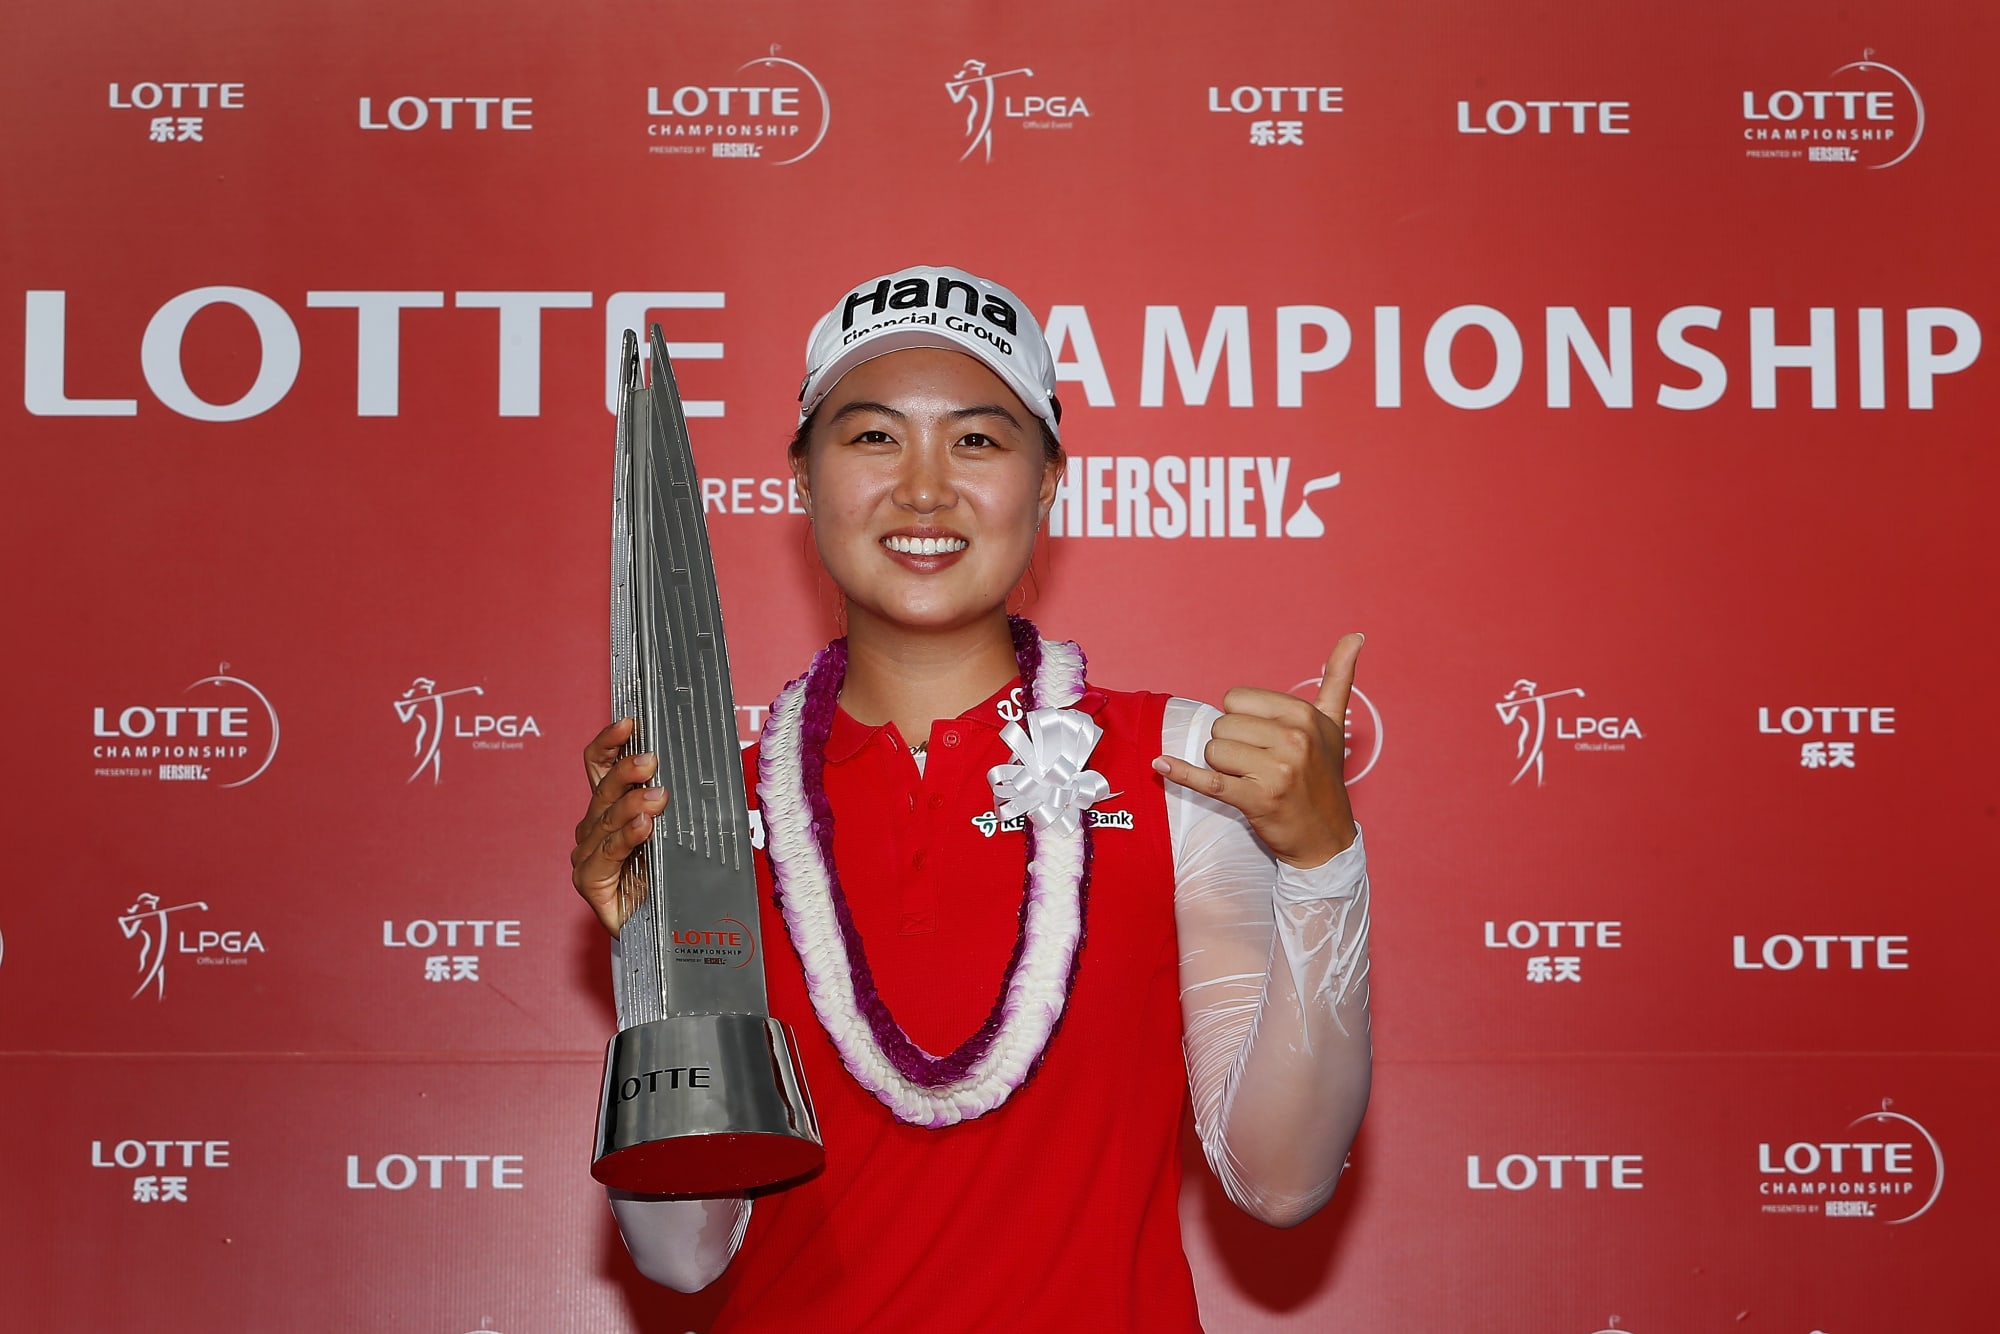 LOTTE Championship Reflections on the Final 9